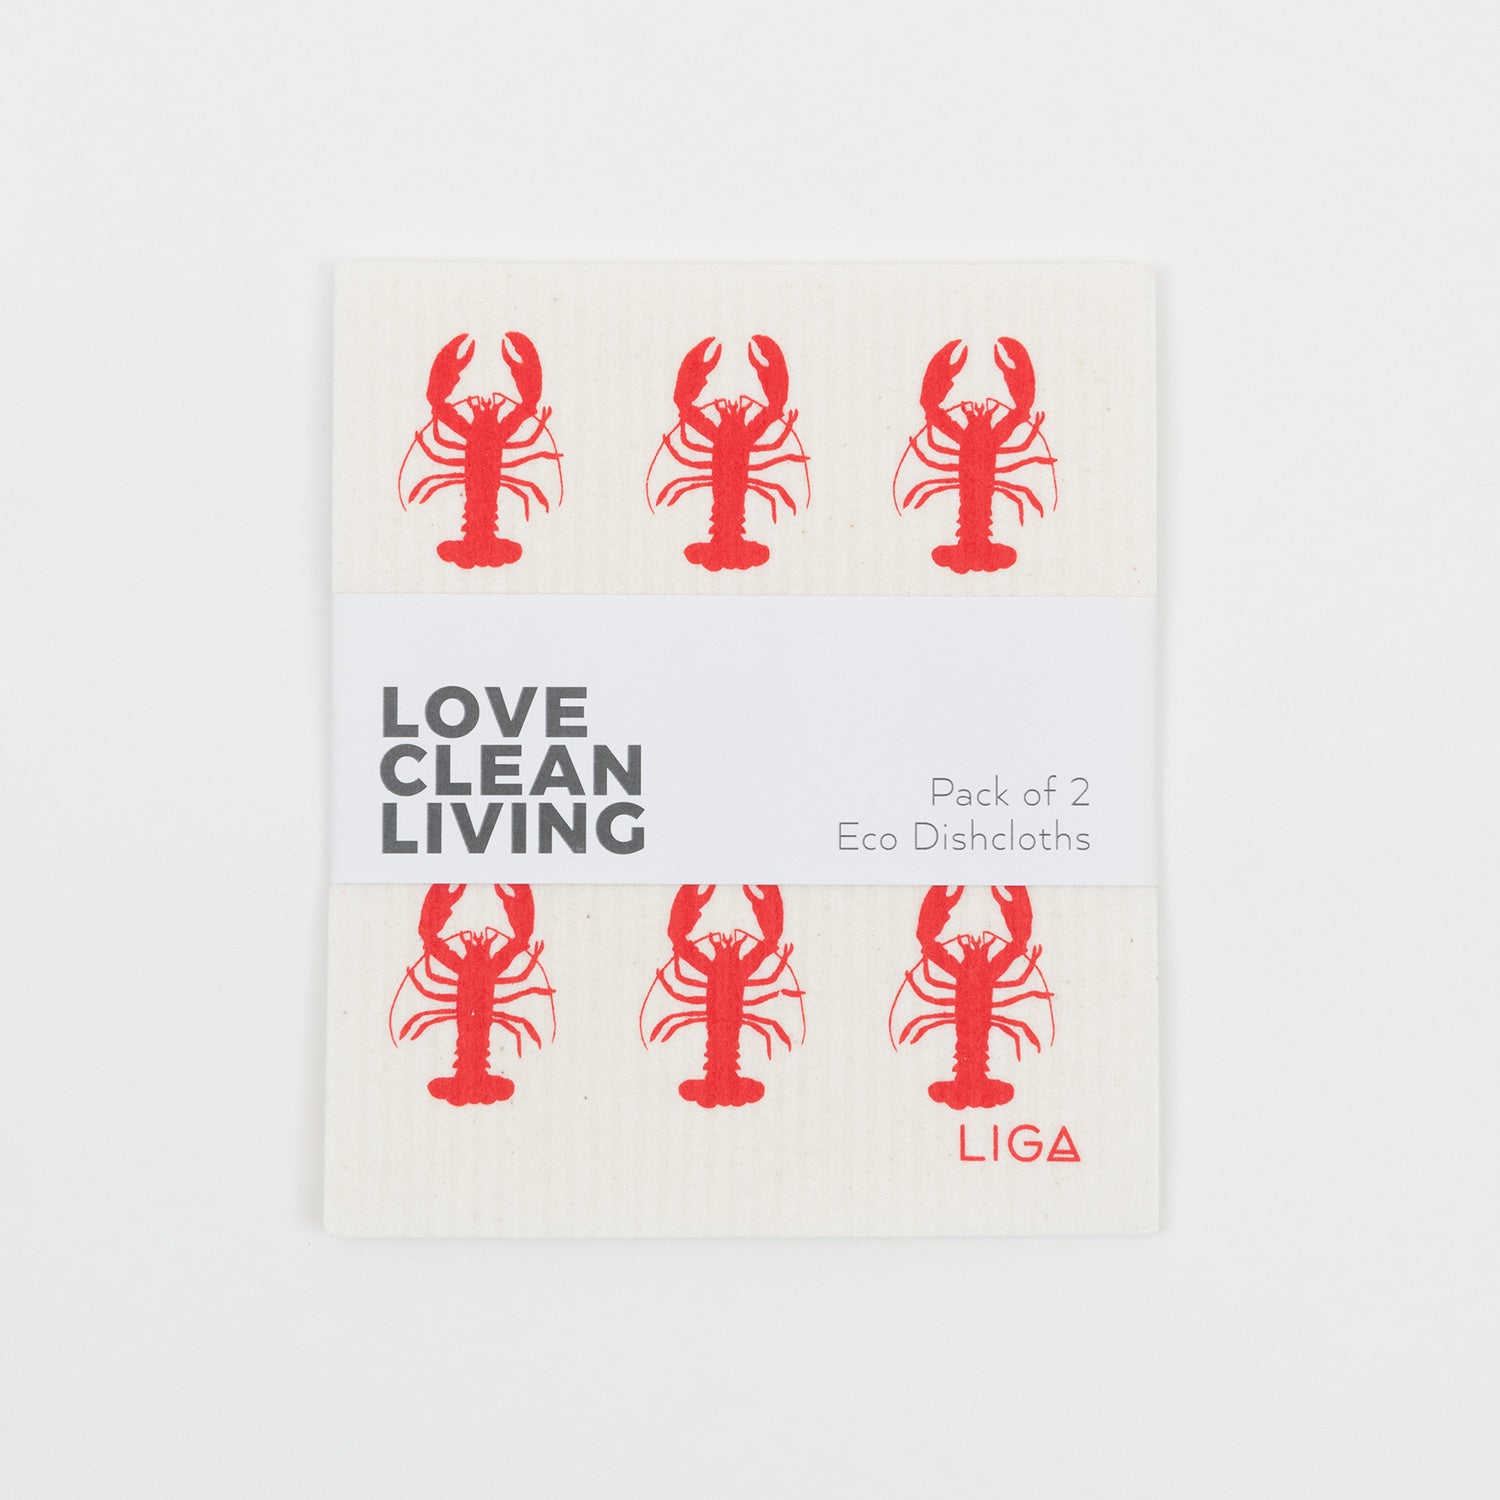 Dishcloth with a red lobster pattern on a light cream background in its packaging.